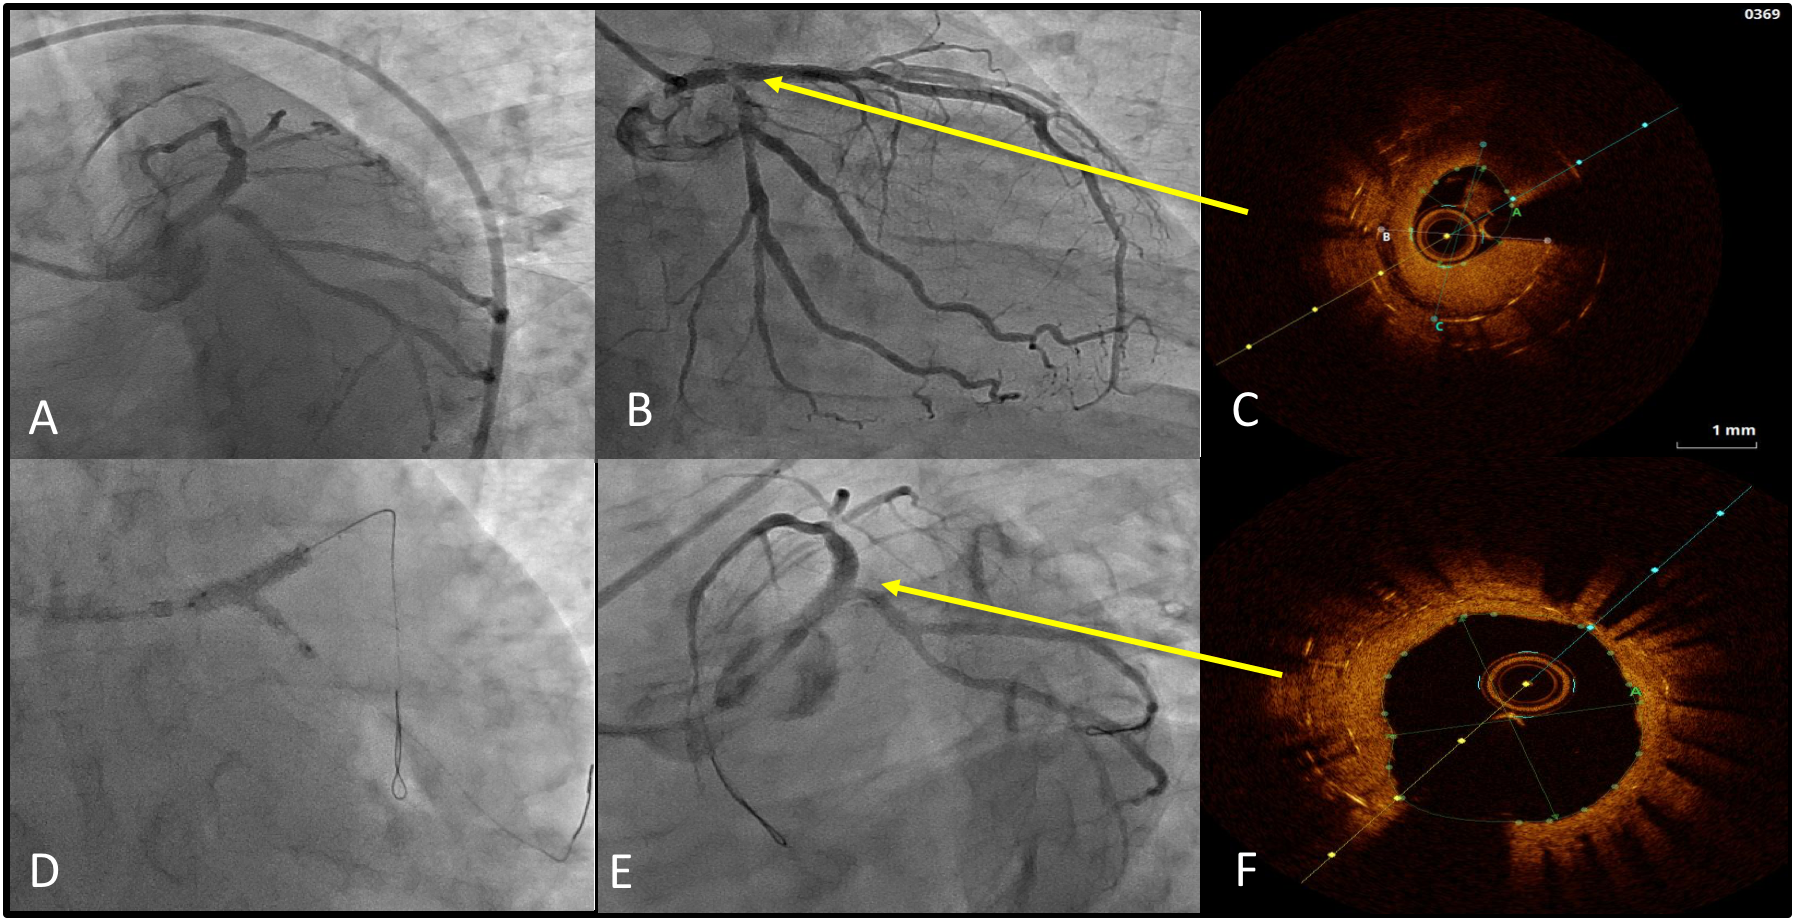 Left Main restenosis-publication of the review article in CRM